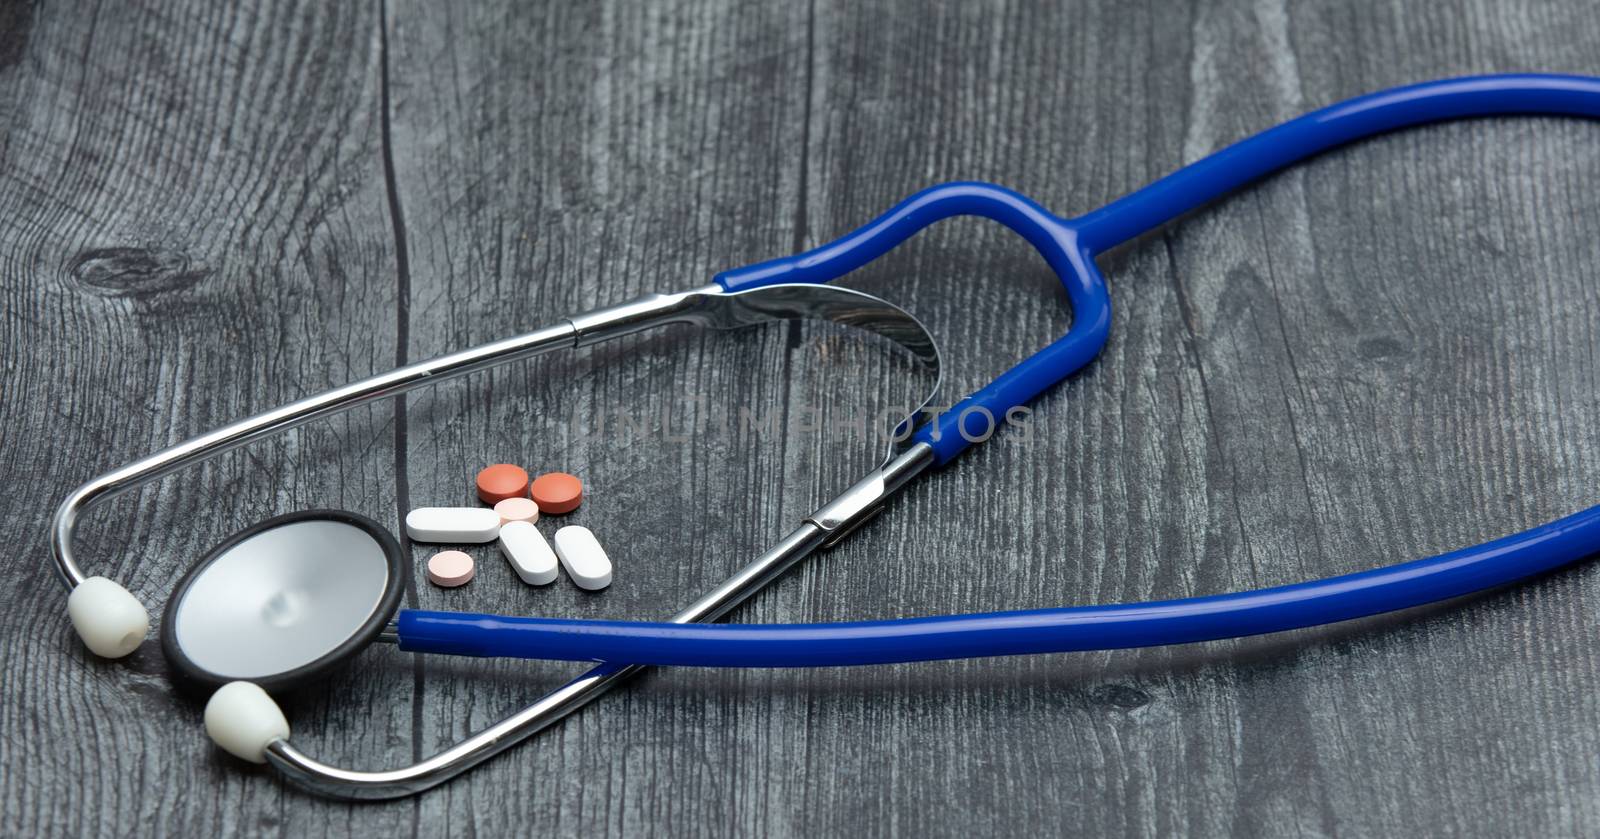 A blue medical stethoscope and a variety of medical pills sit on a wooden table.